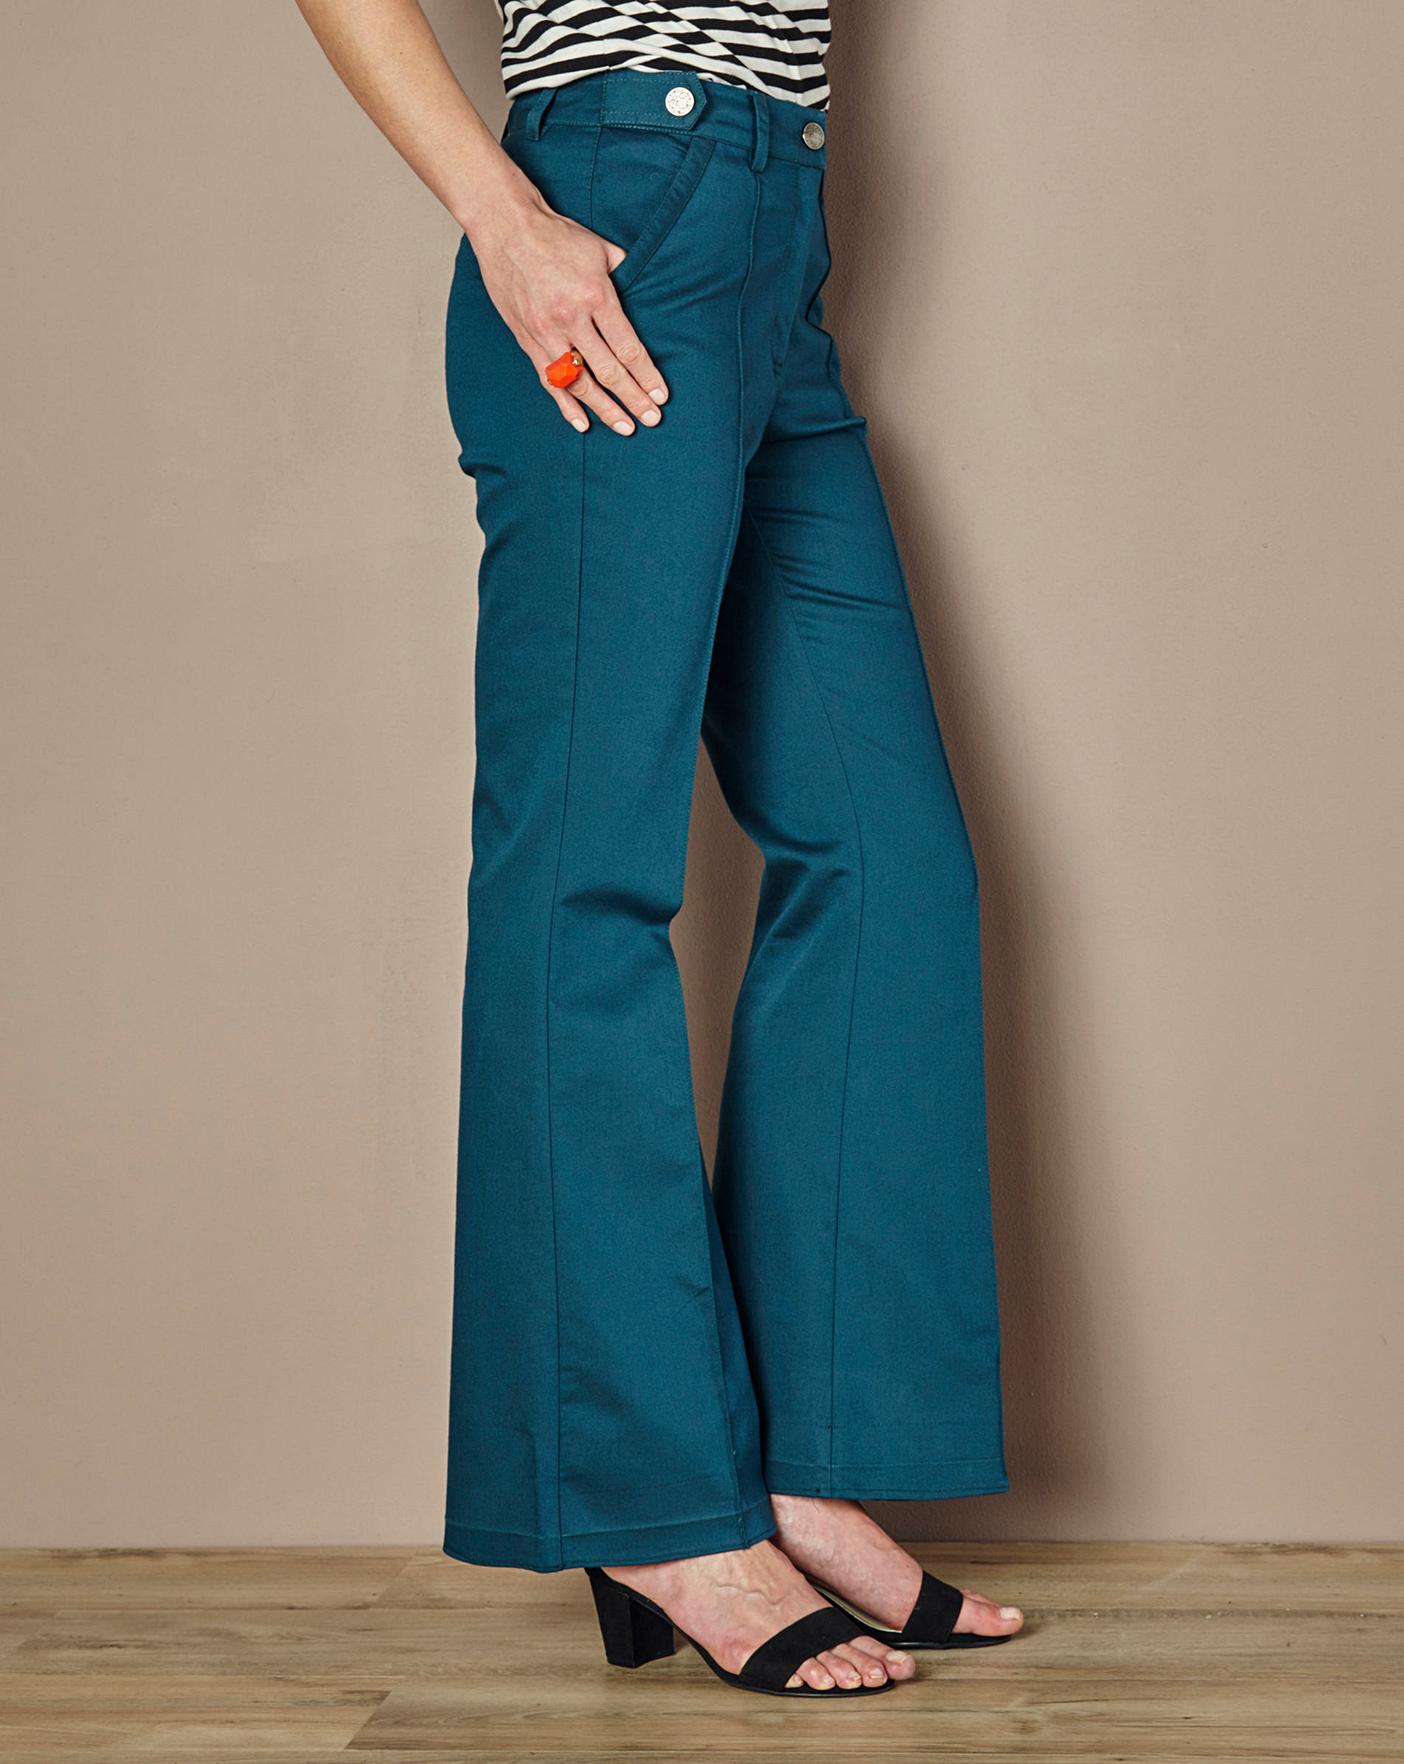 front seam flare jeans